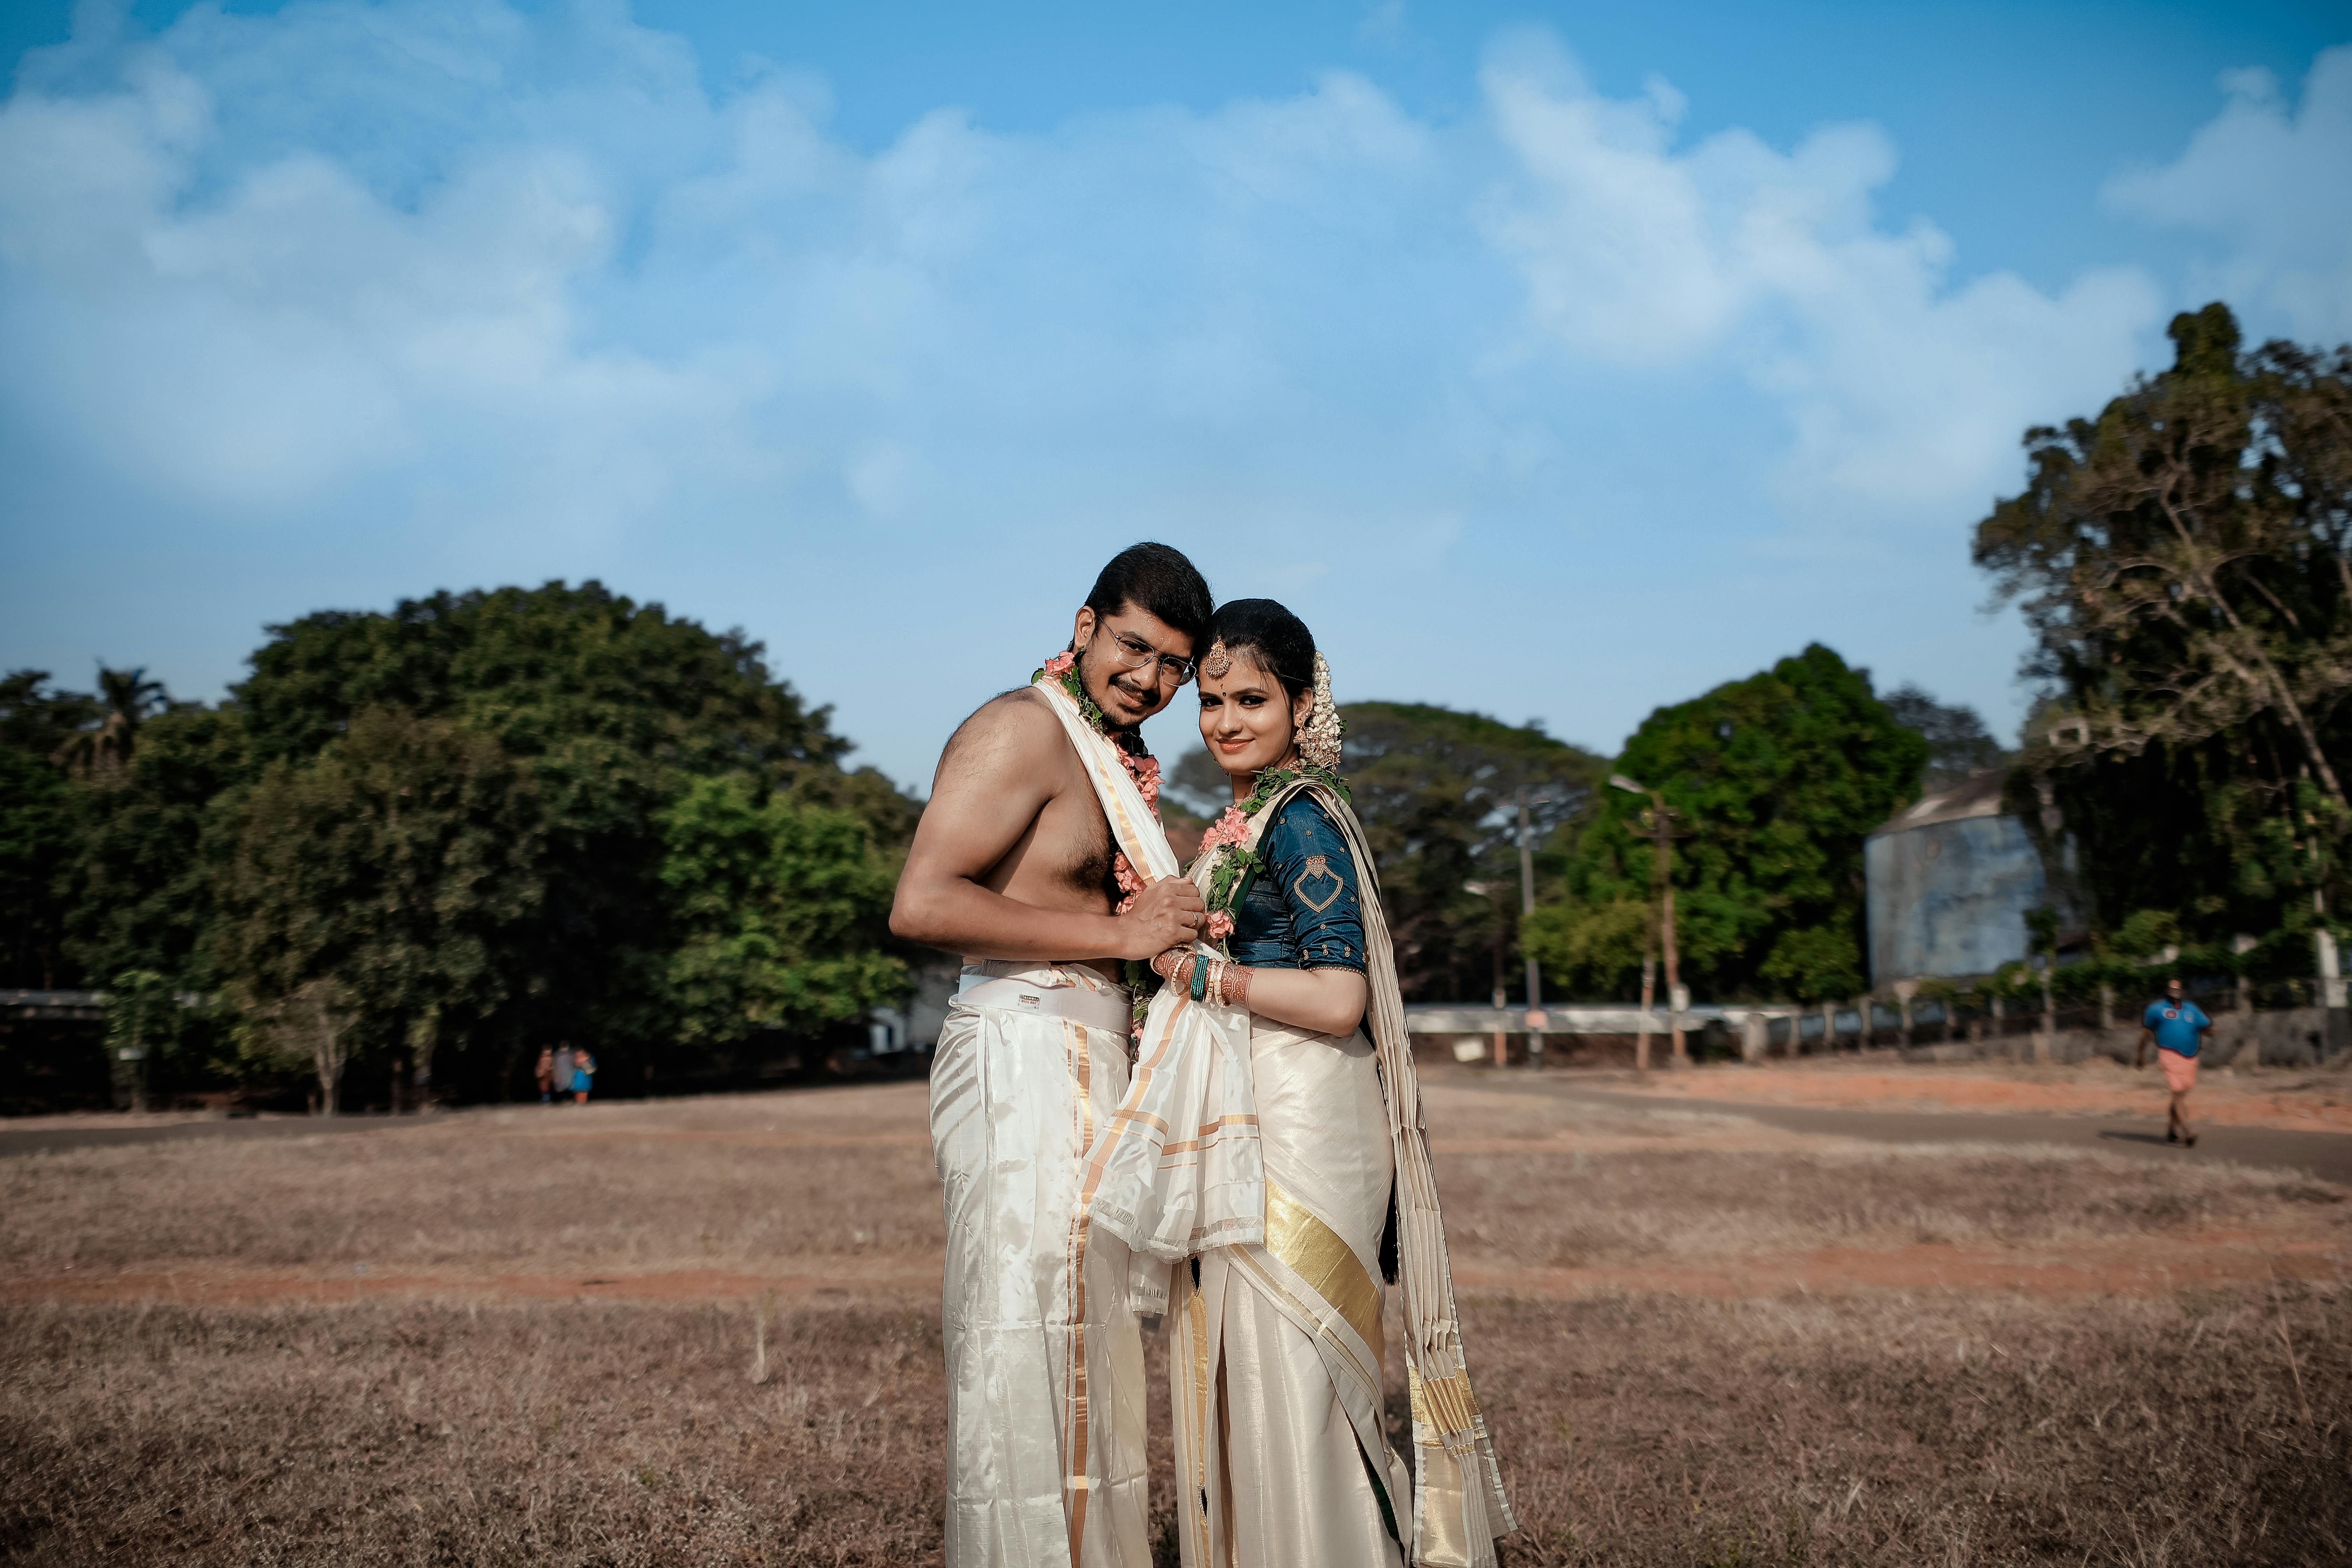 Indian Wedding Photography Poses to Treasure Forever